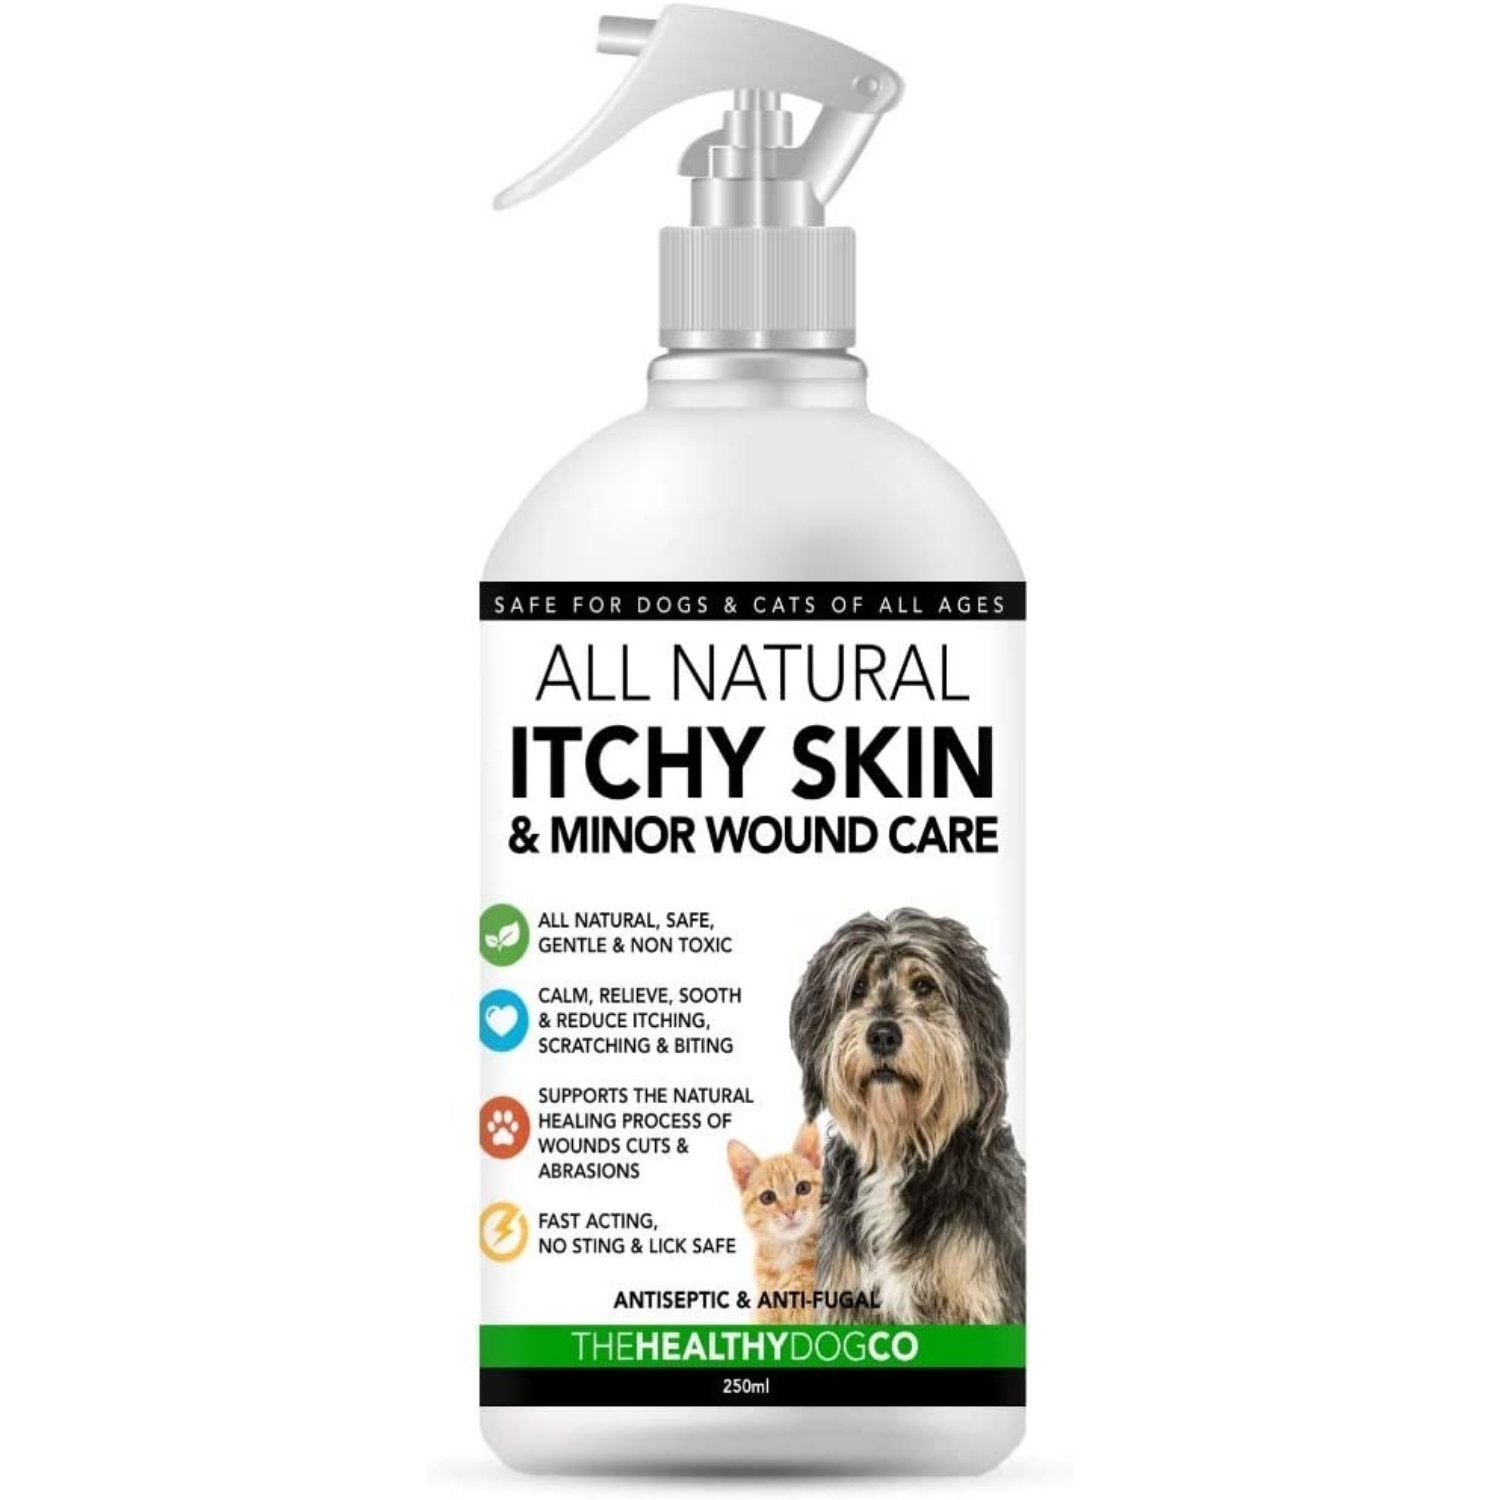 All Natural Itchy Skin & Minor Wound Care